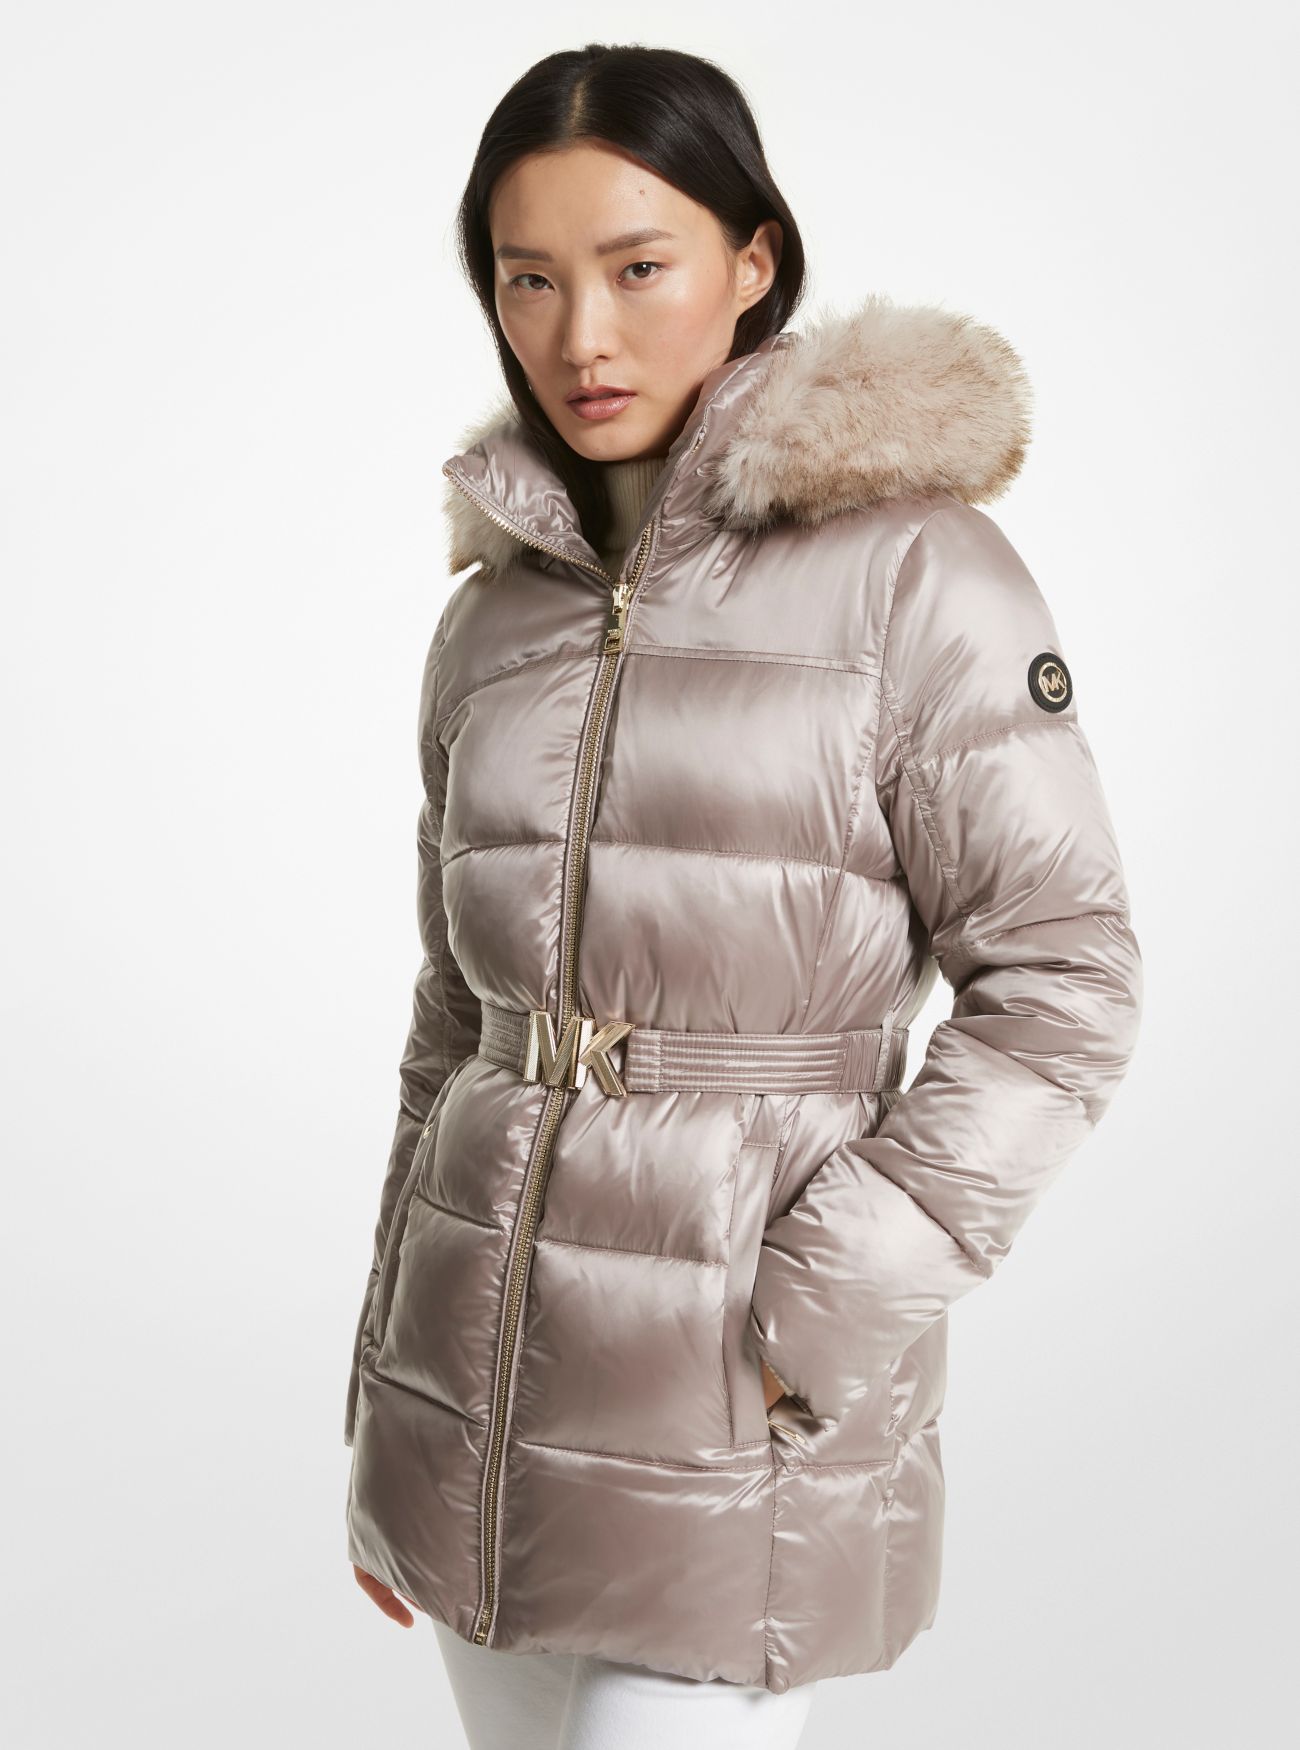 MK Quilted Puffer Jacket - Gold - Michael Kors